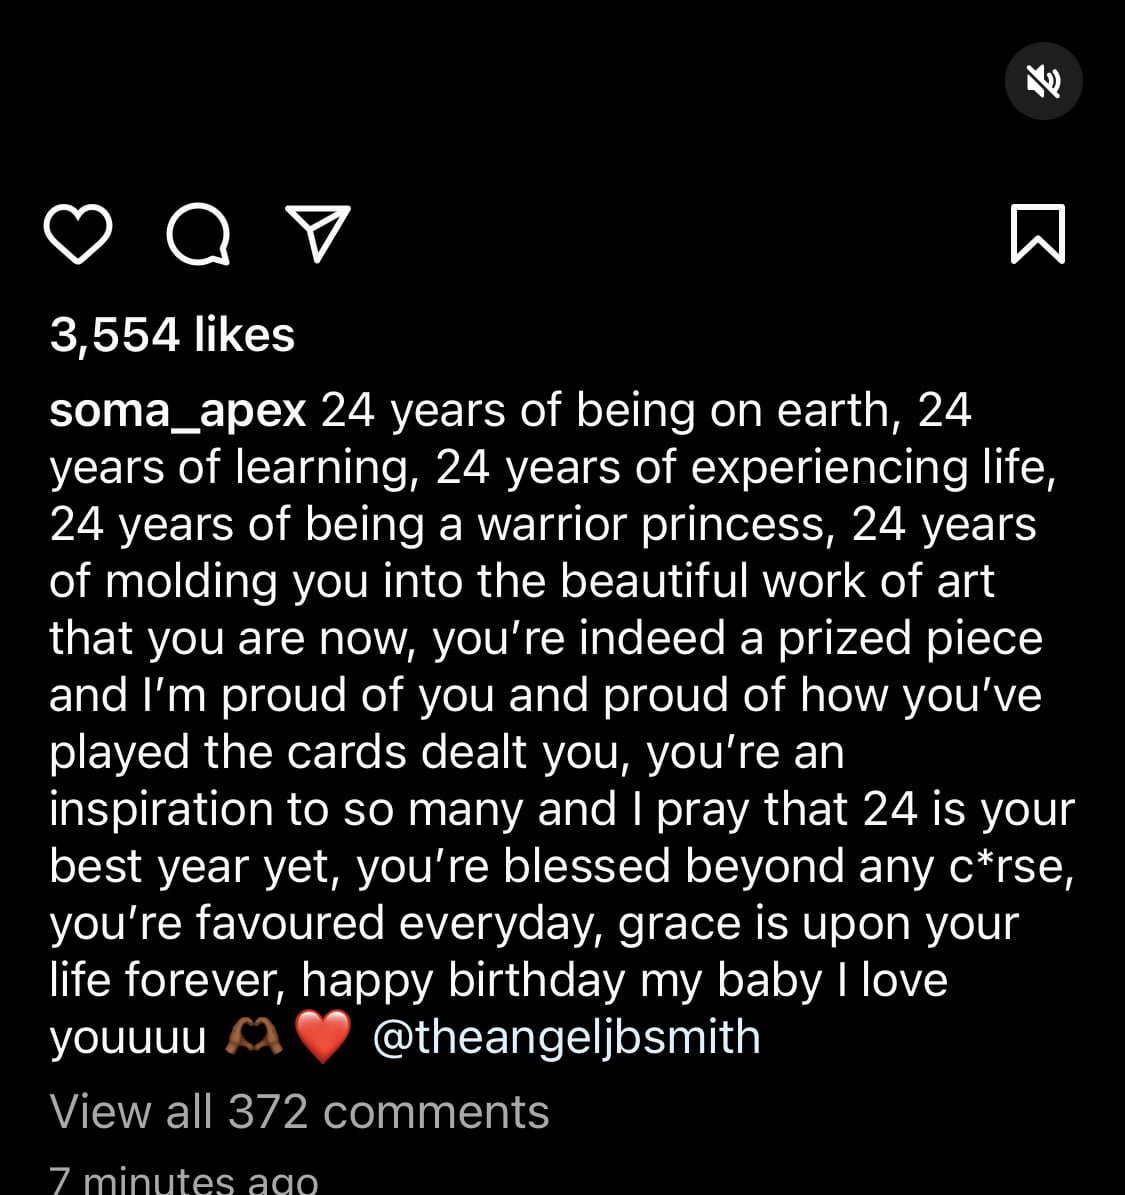 Soma’s cute post for Angel on her birthday.